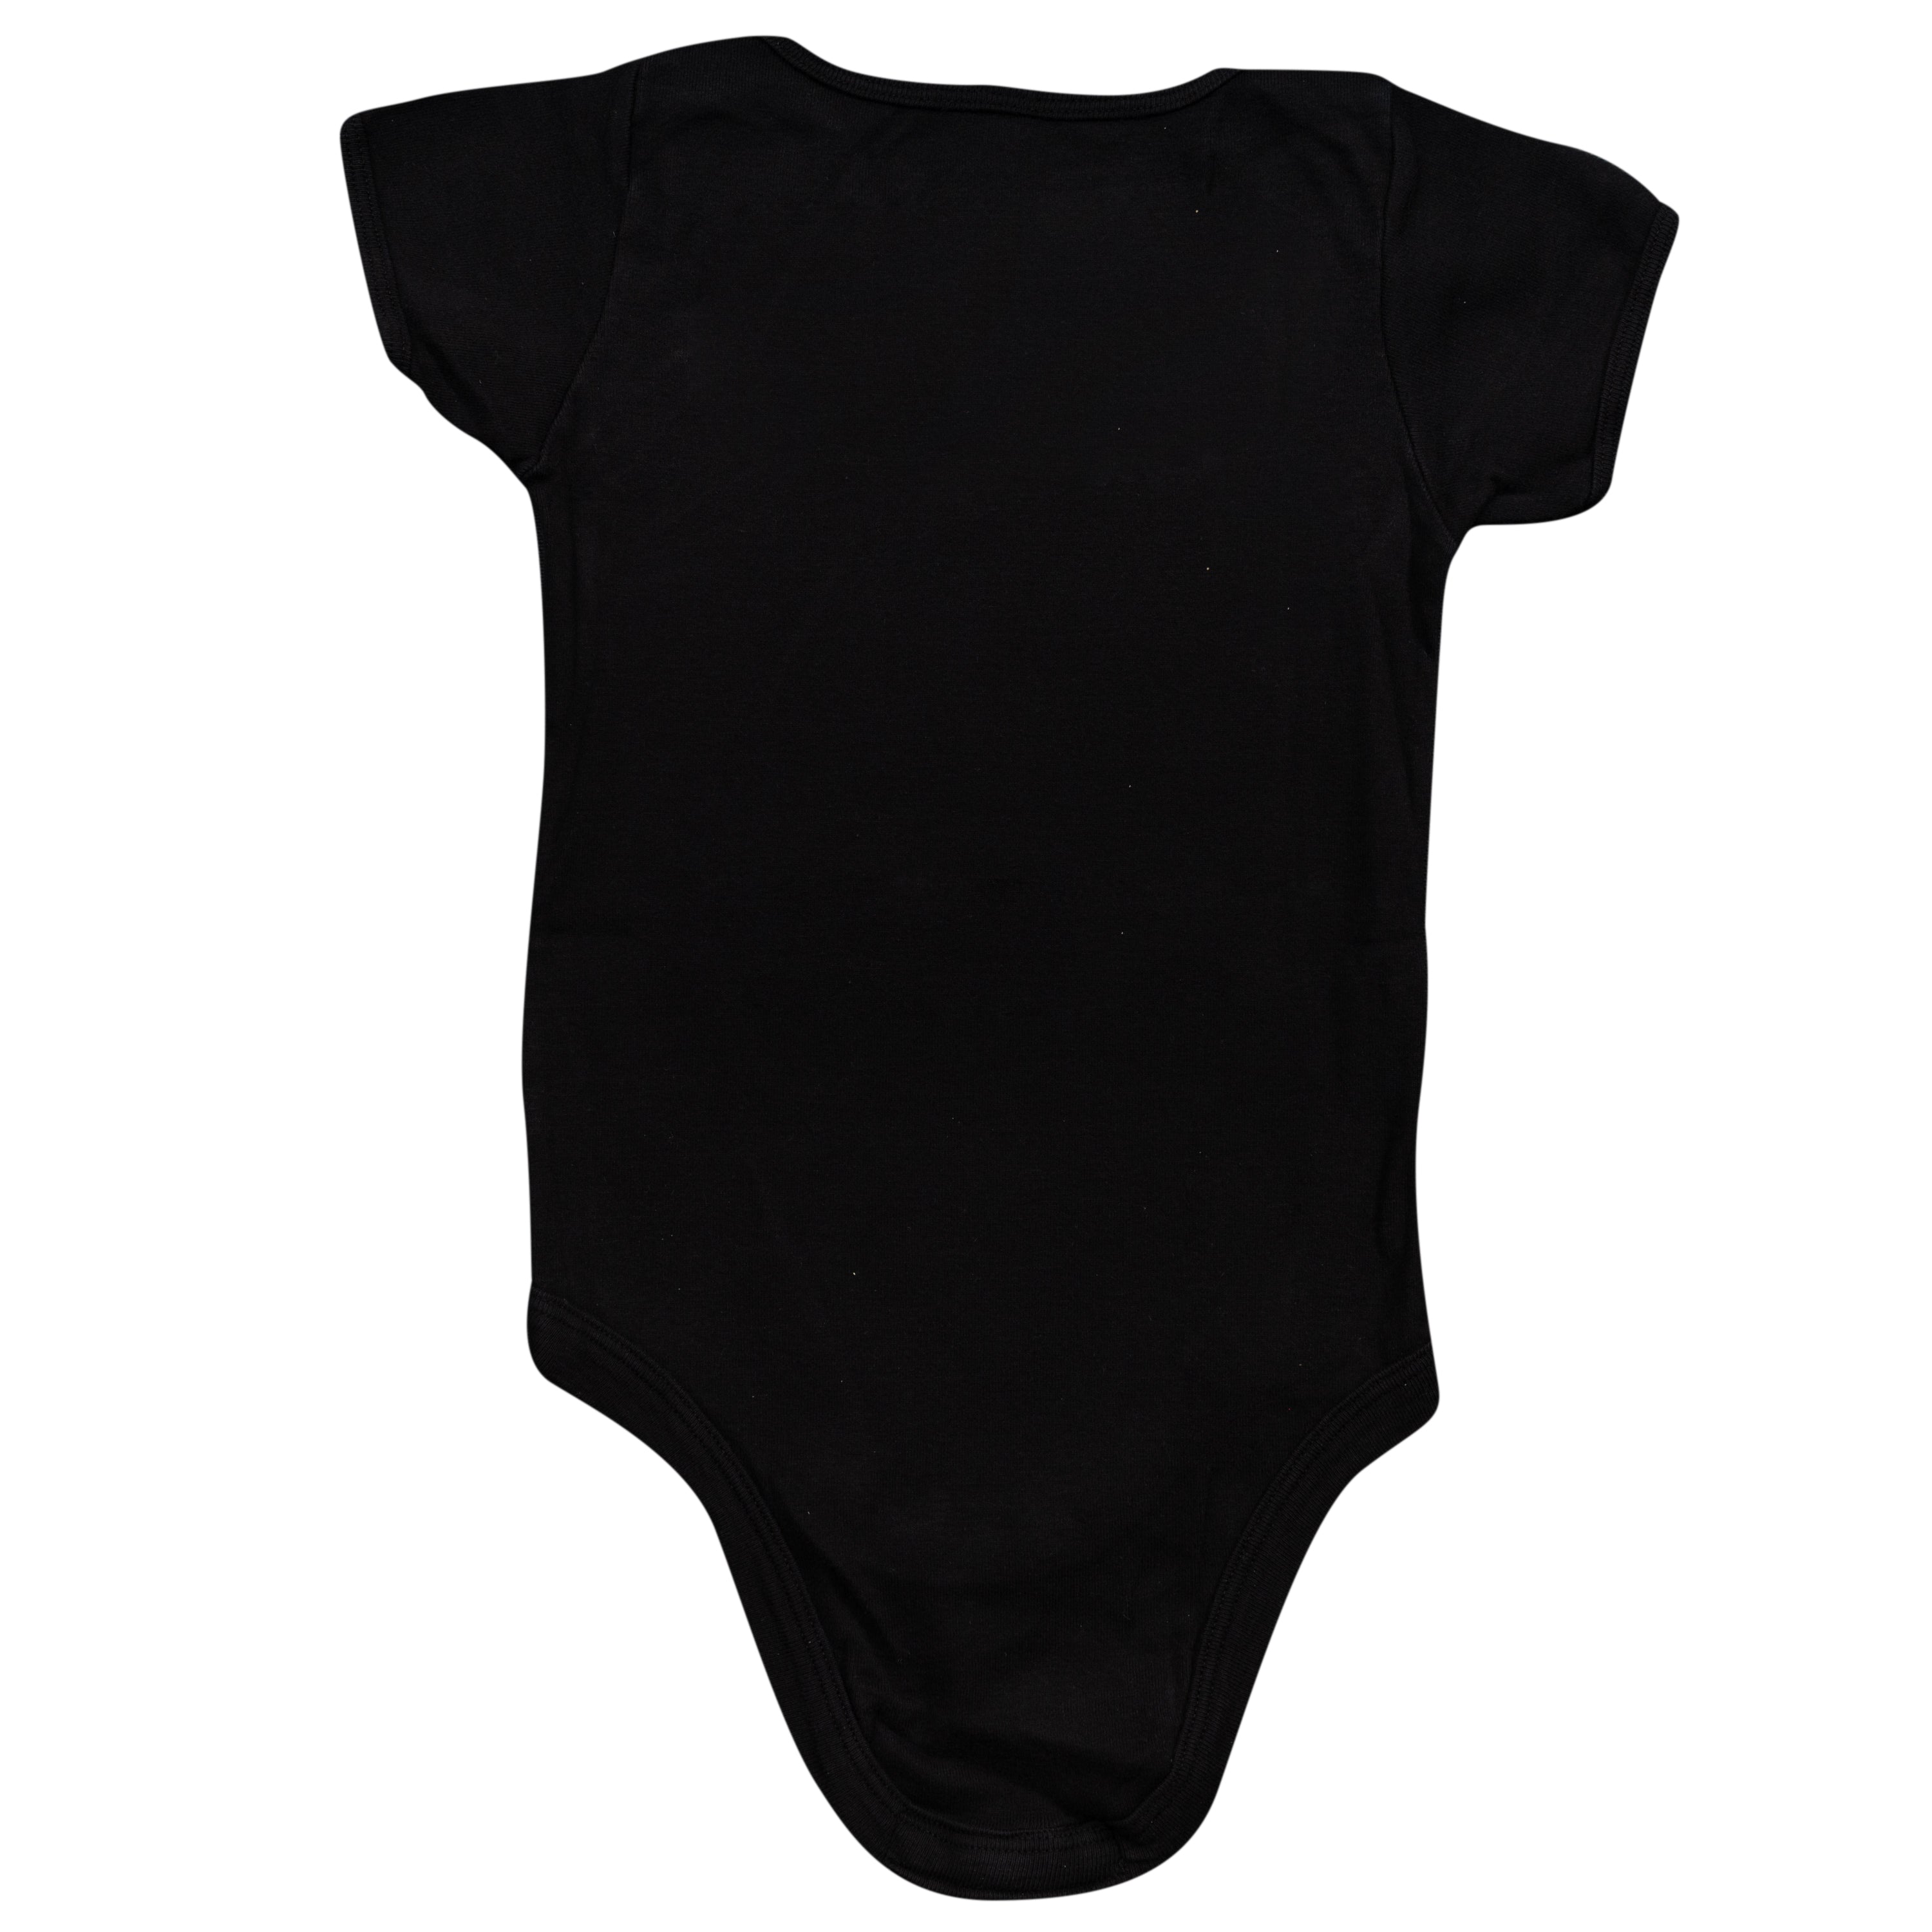 The Beatles Abbey Road London 1969 Black Infant Baby One Piece Romper